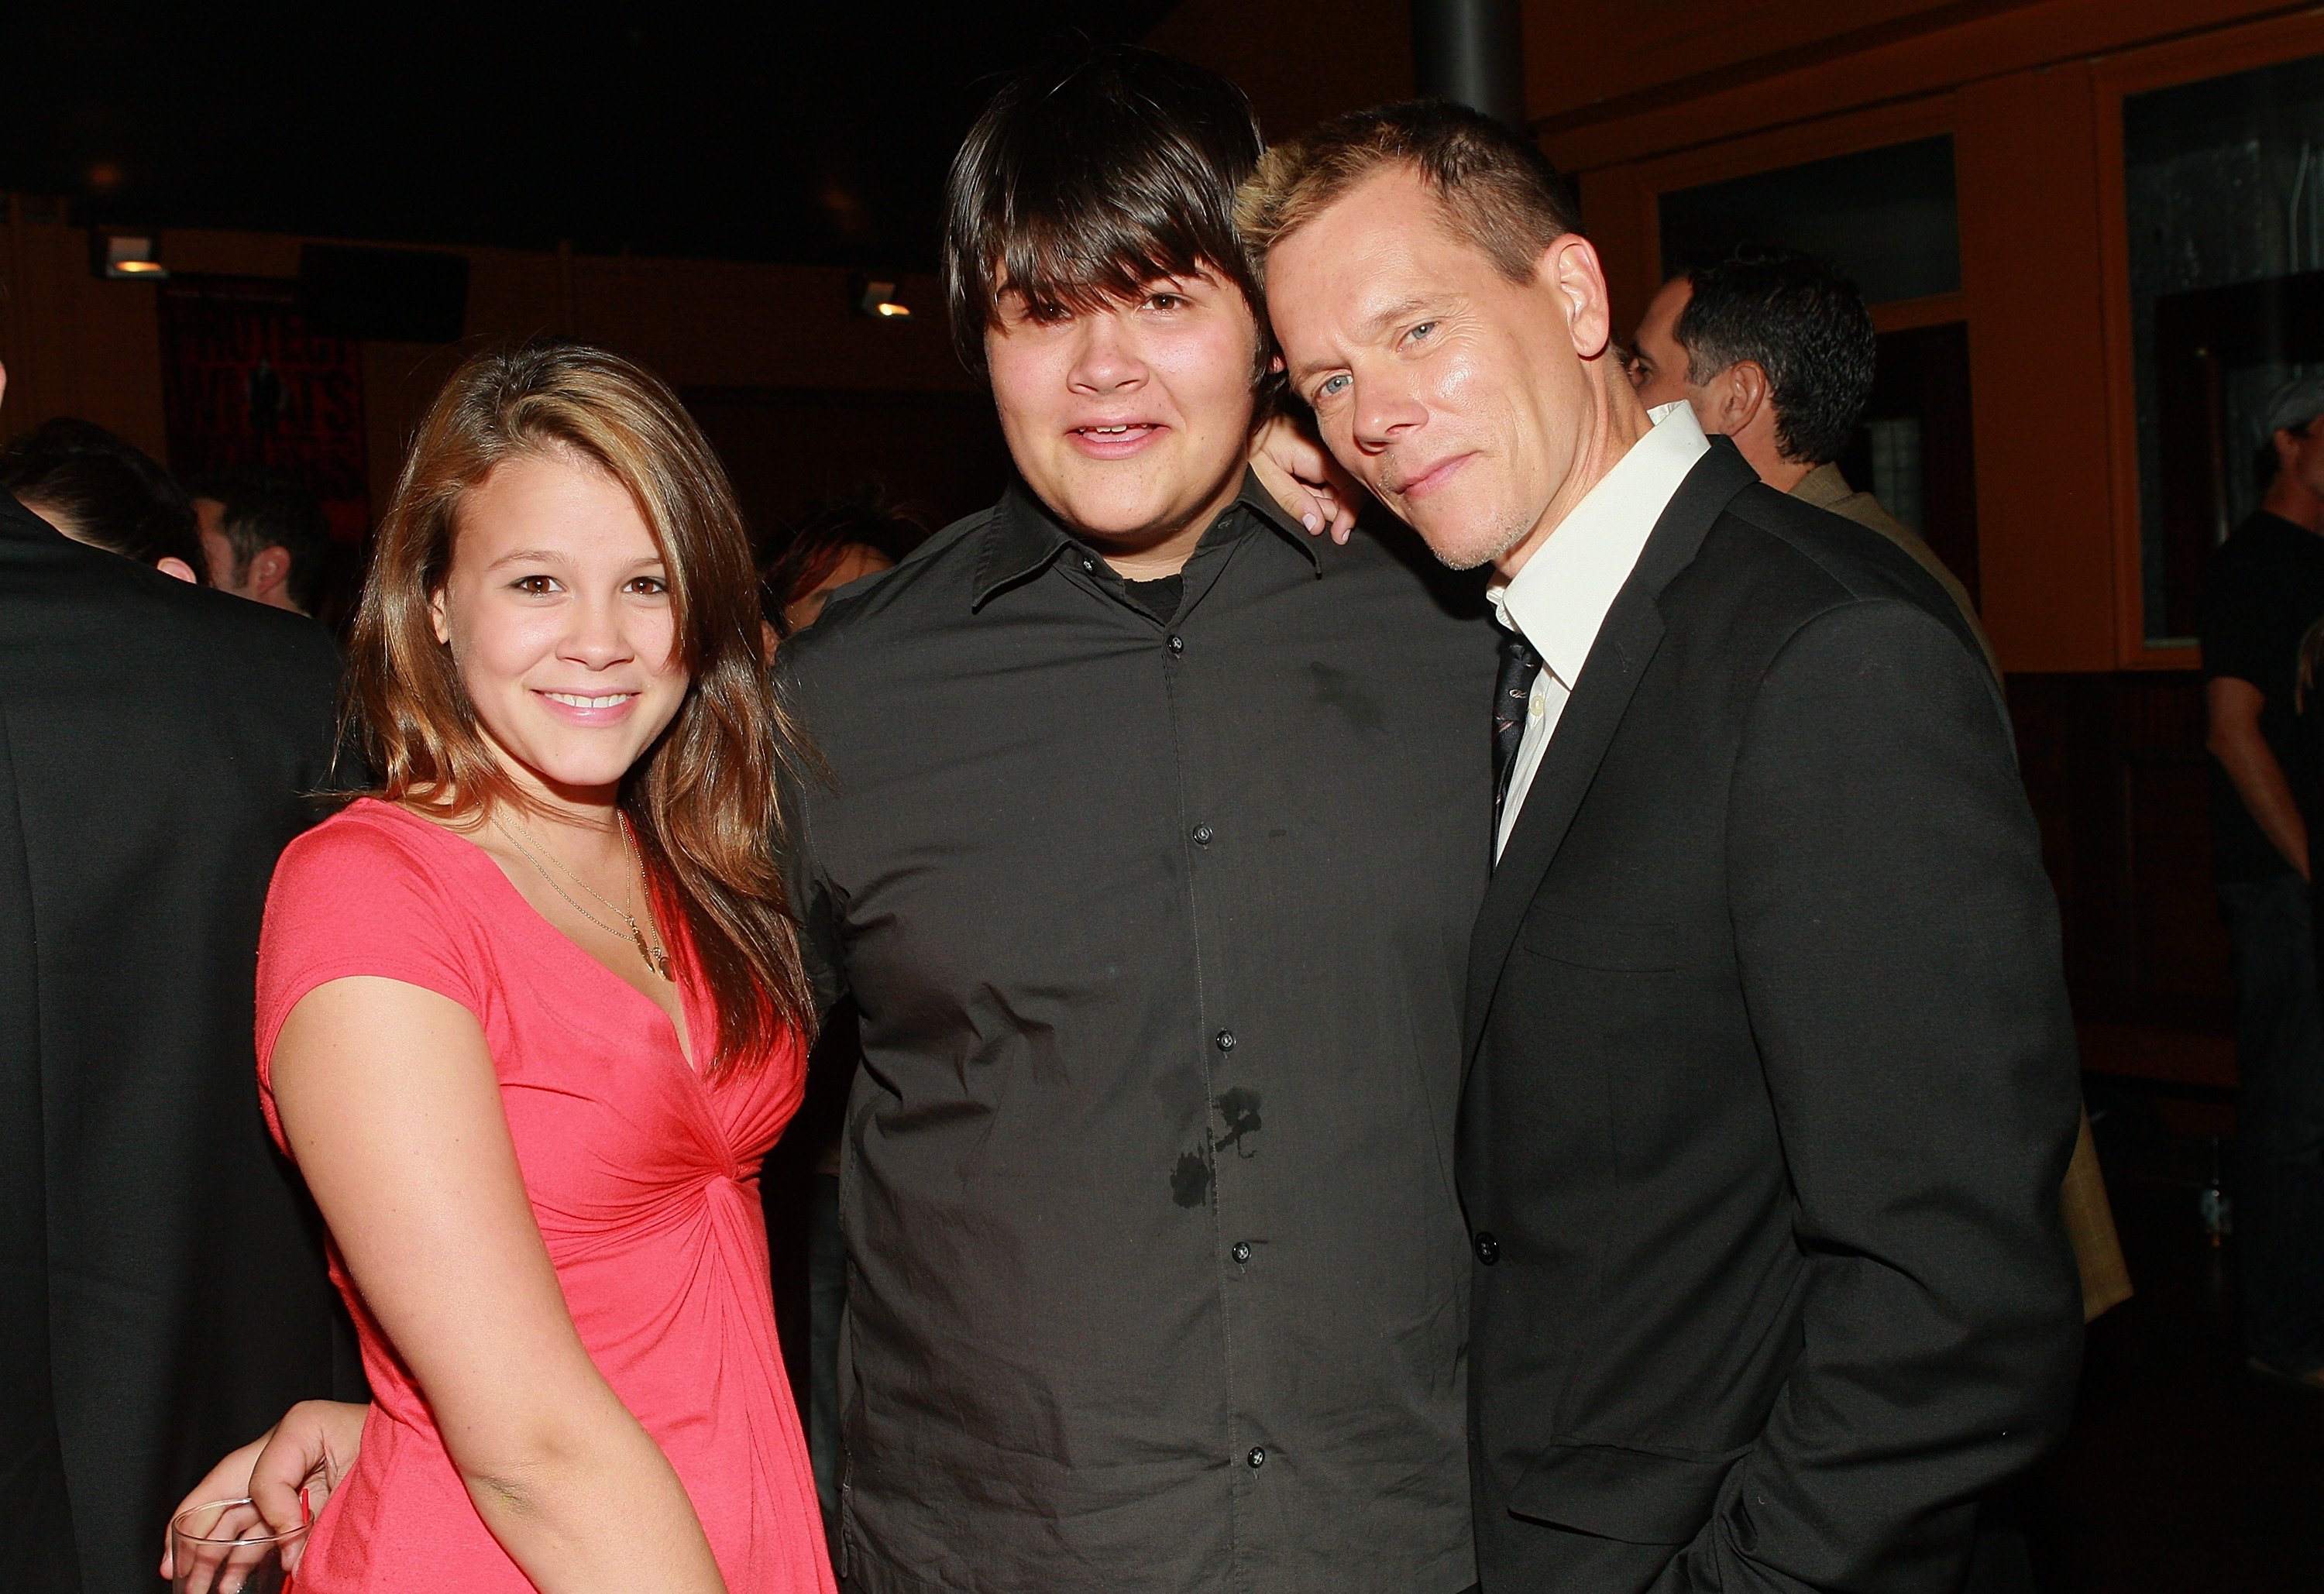 Actor Kevin Bacon (R) and children Sosie and Travis attend the "Death Sentence" premiere after party at the Tribeca Cinemas, August 28, 2007 in New York City. | Source: Getty Images